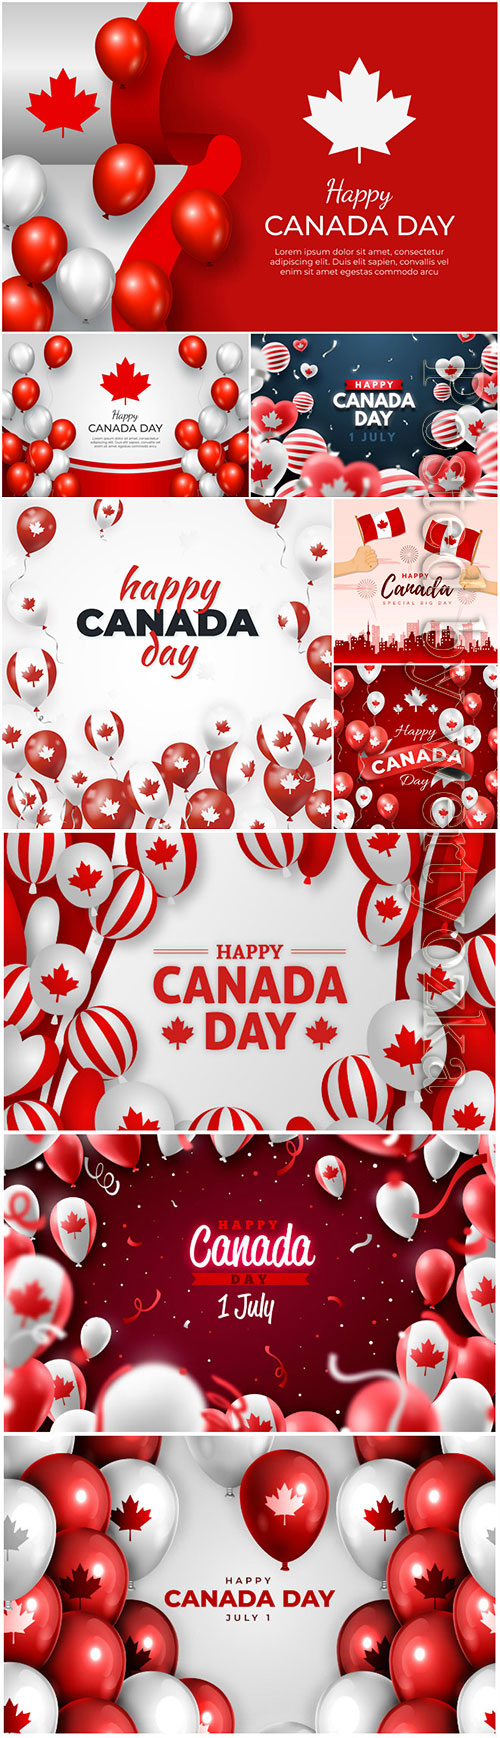 Realistic canada day balloons background vector set